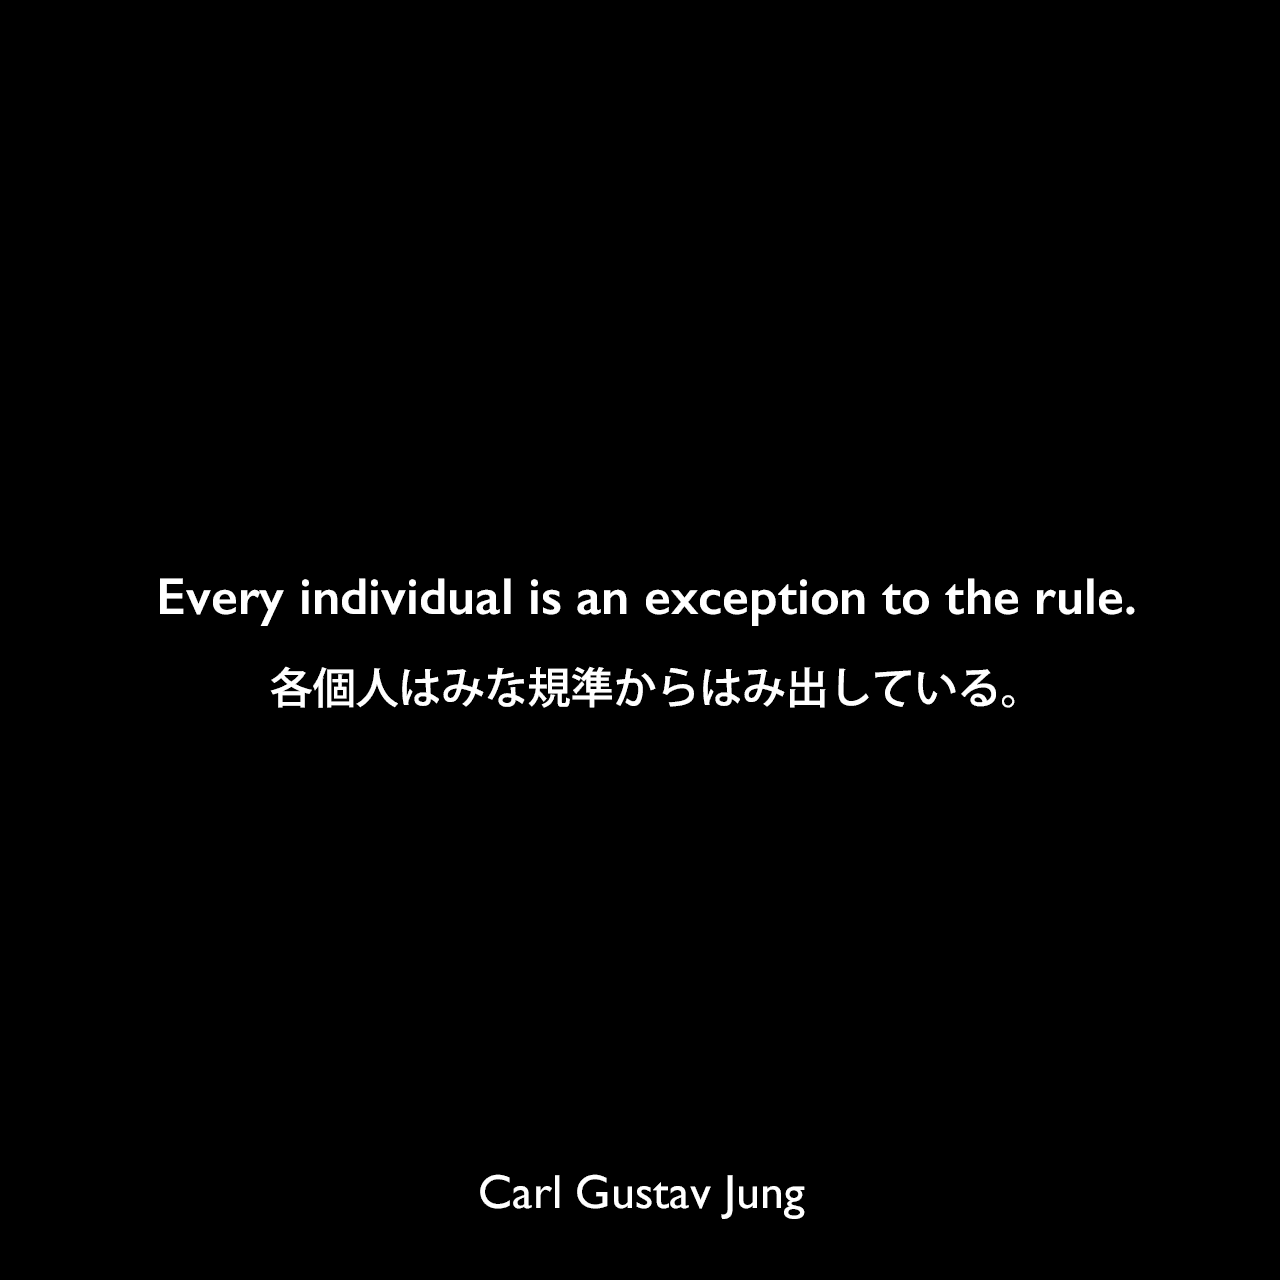 Every individual is an exception to the rule.各個人はみな規準からはみ出している。Carl Gustav Jung